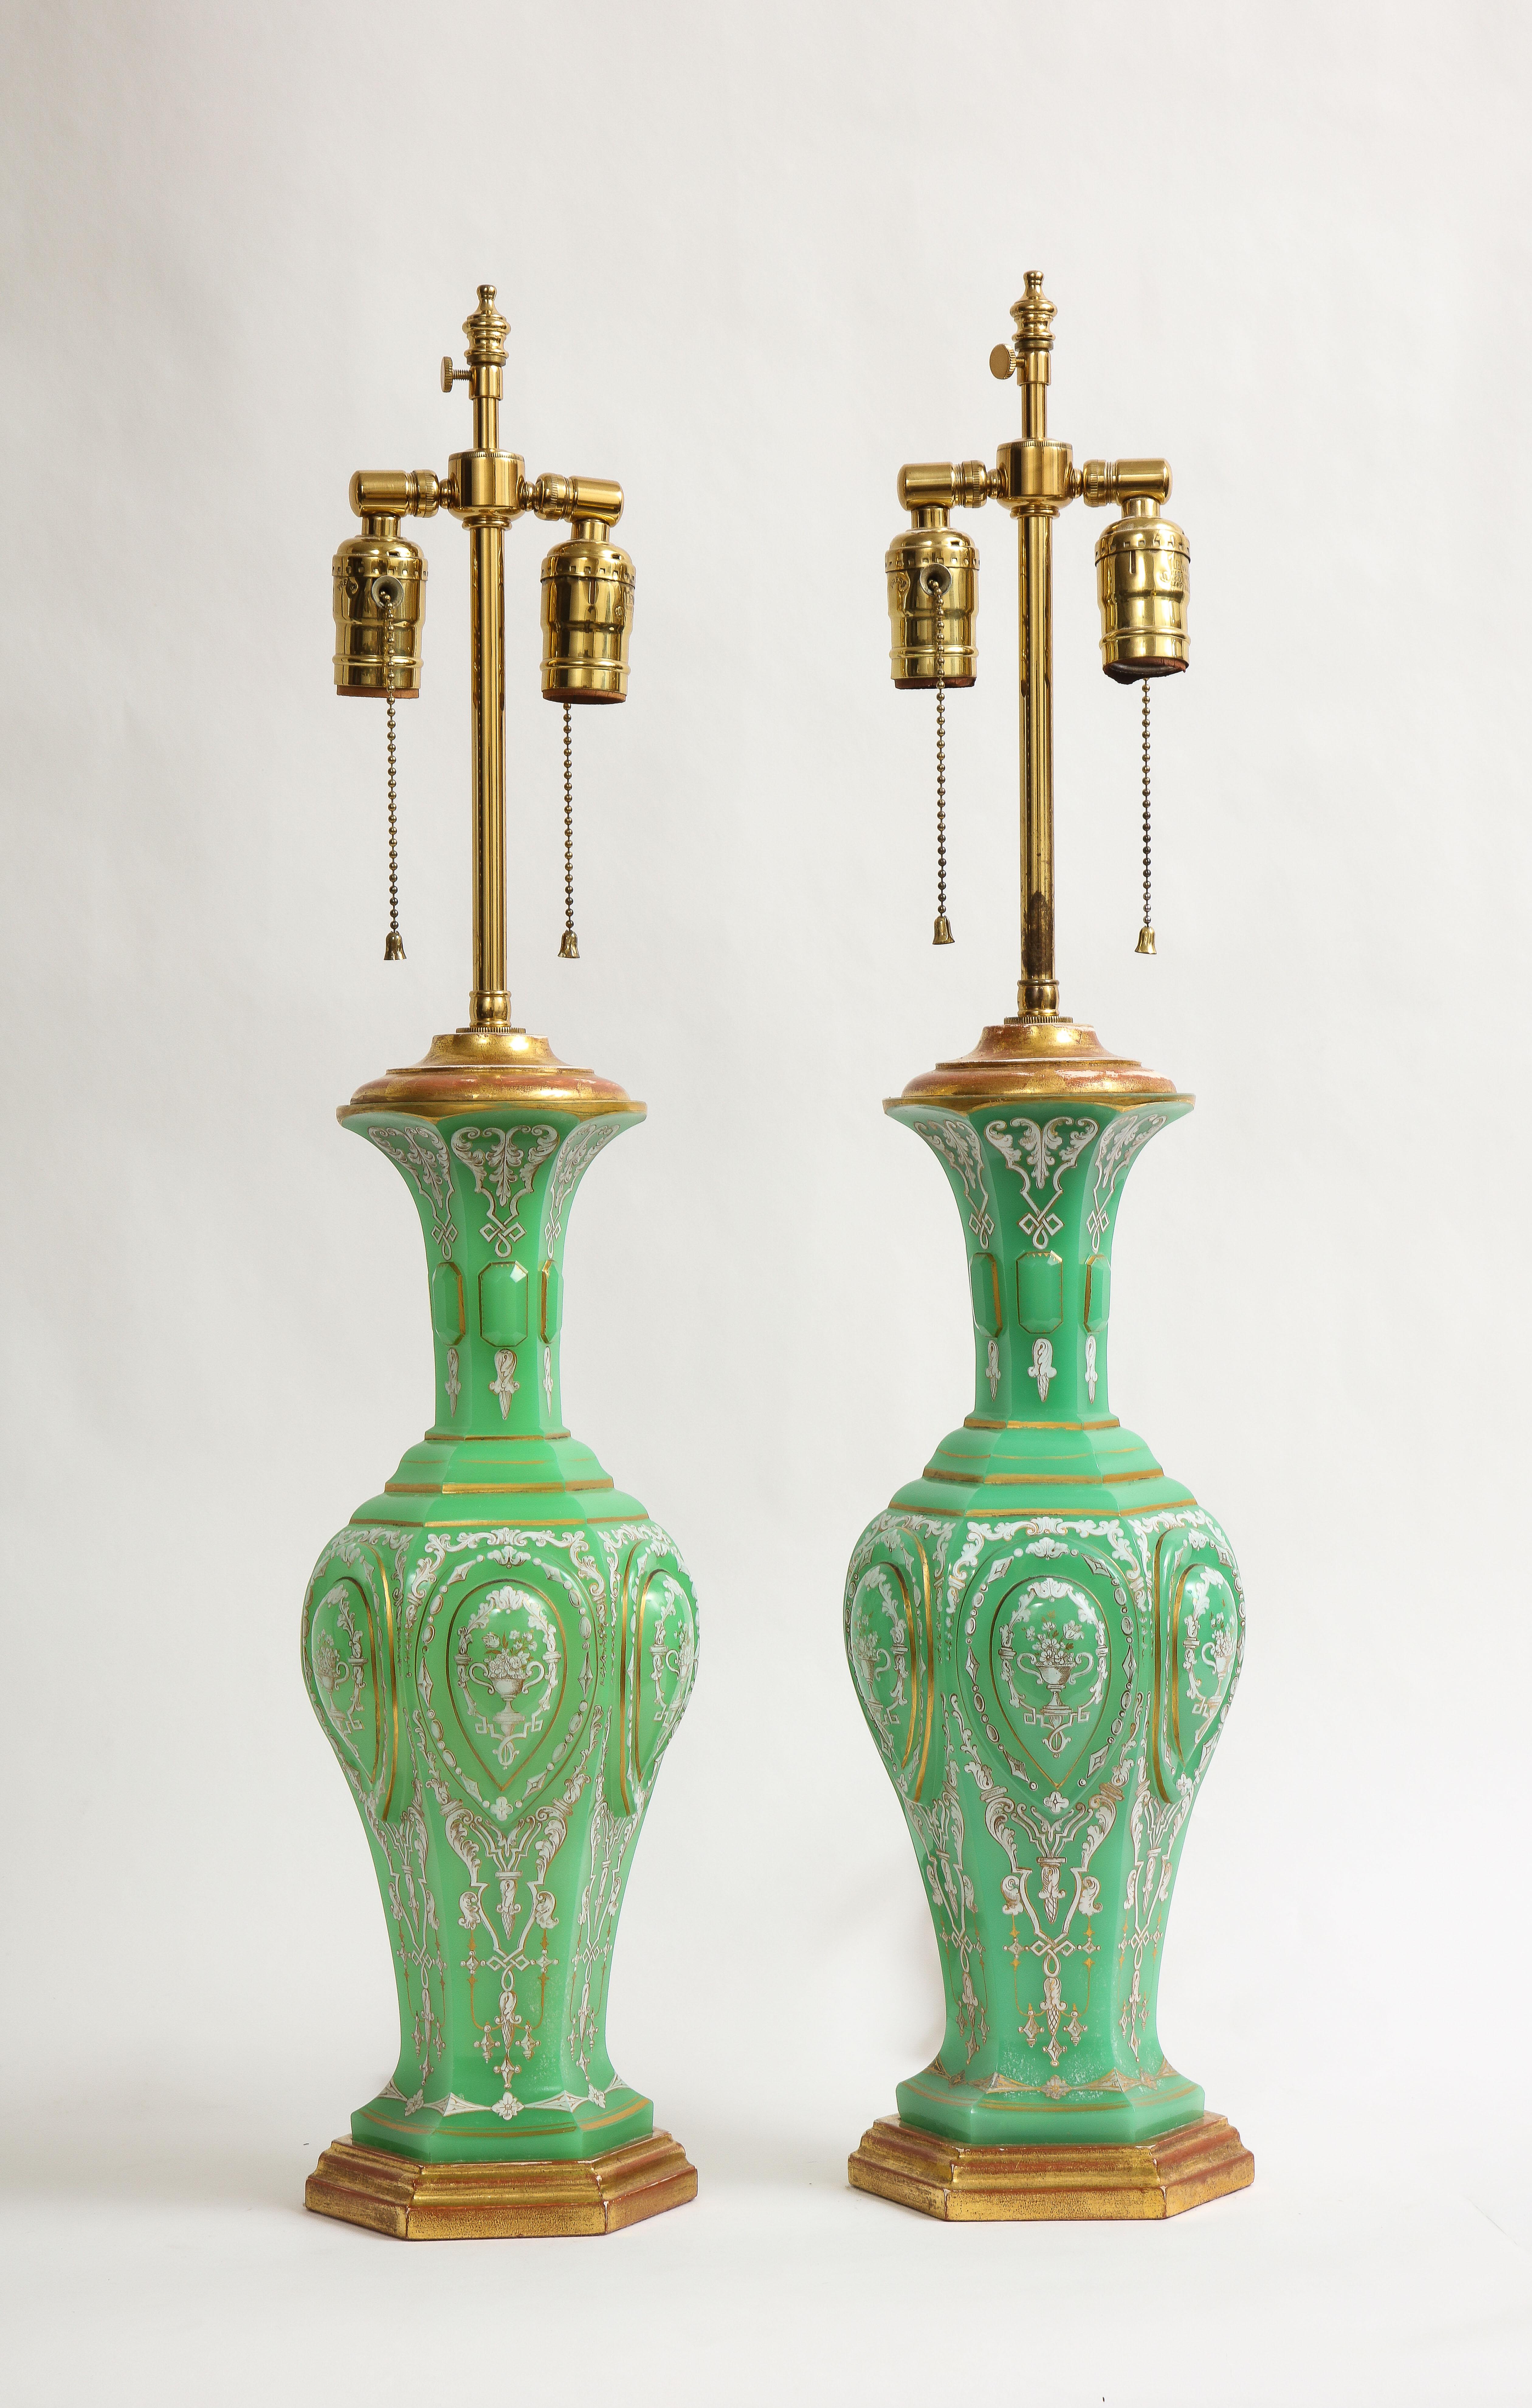 An incredible pair of 19th century French giltwood Emerald green opaline crystal and Enamel lamps, attributed to Baccarat. Each of these is made with the finest hand-cut French emerald green opaline crystal. The sides of each are beveled and have